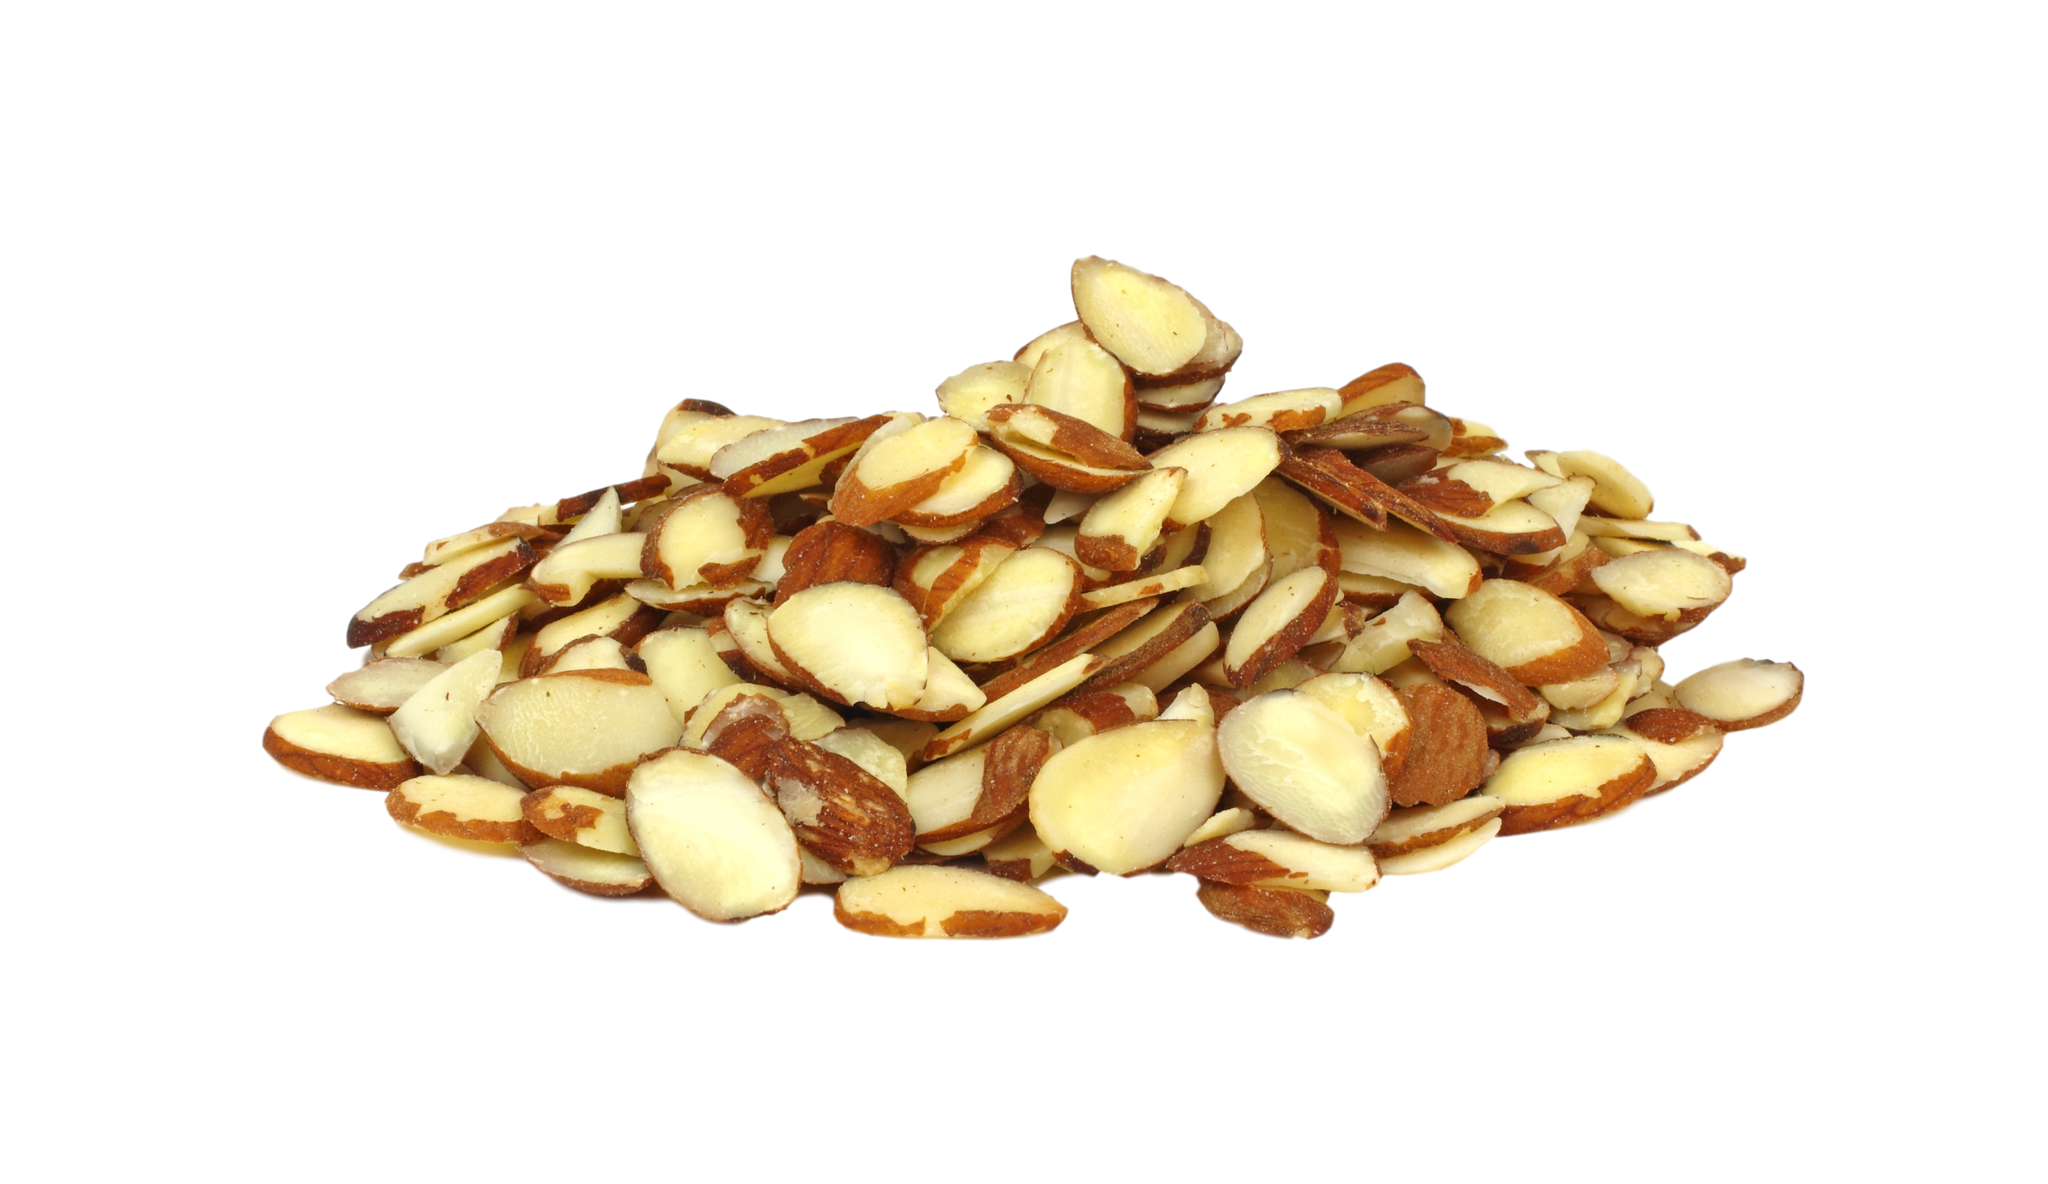 nuts clipart chopped